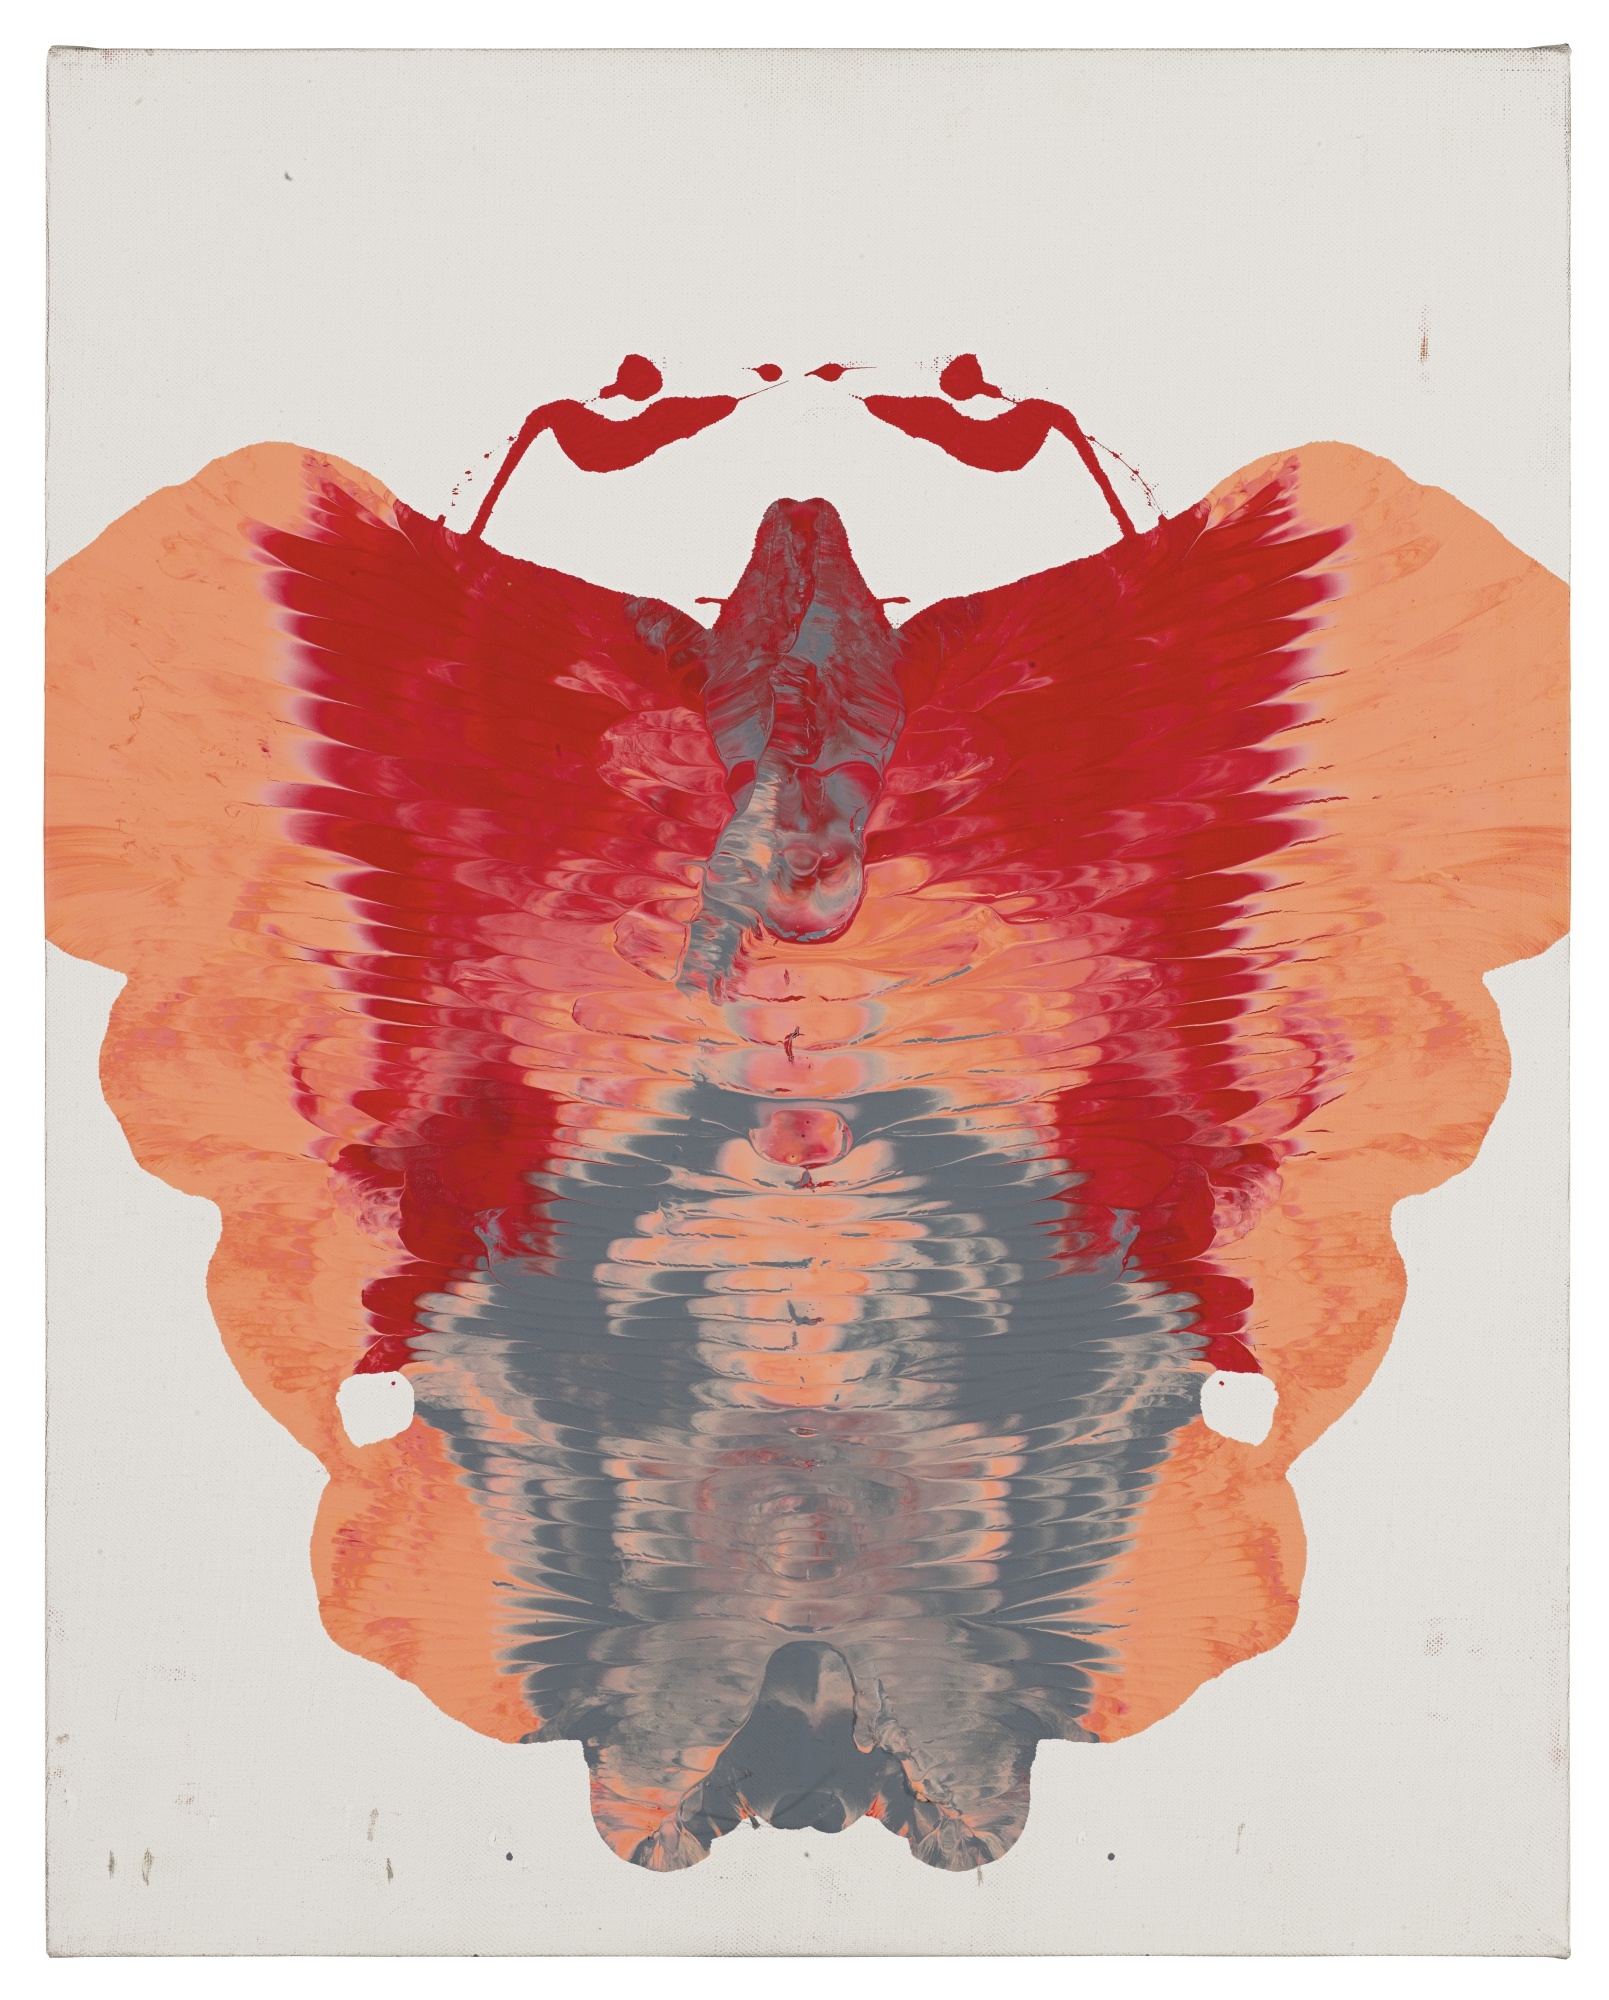 RORSCHACH by Andy Warhol, 1984